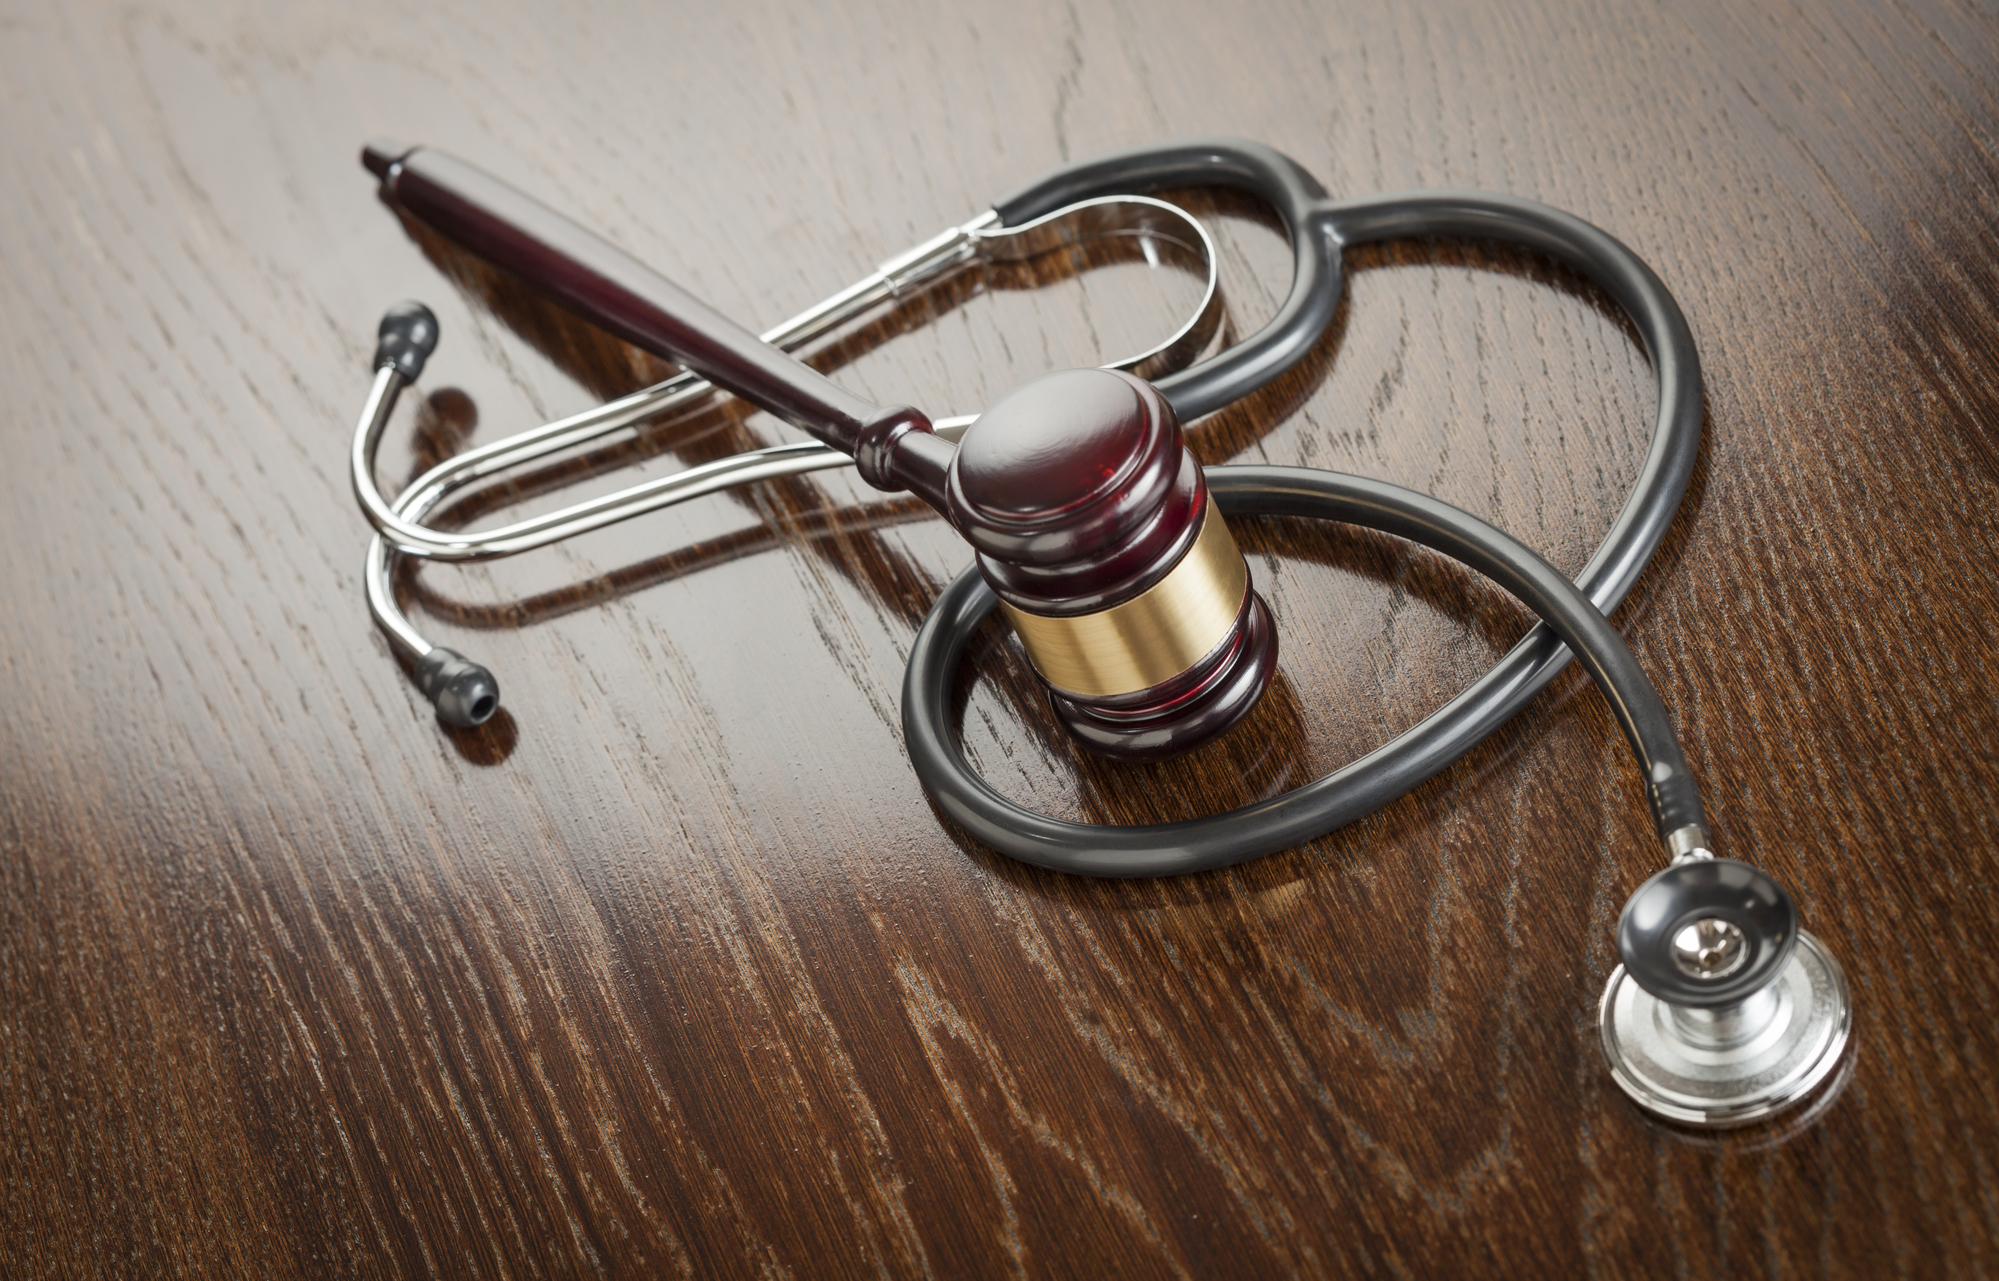 Medicaid Lawyer Warwick, RI - Gavel and Stethoscope on Reflective Wooden Table.